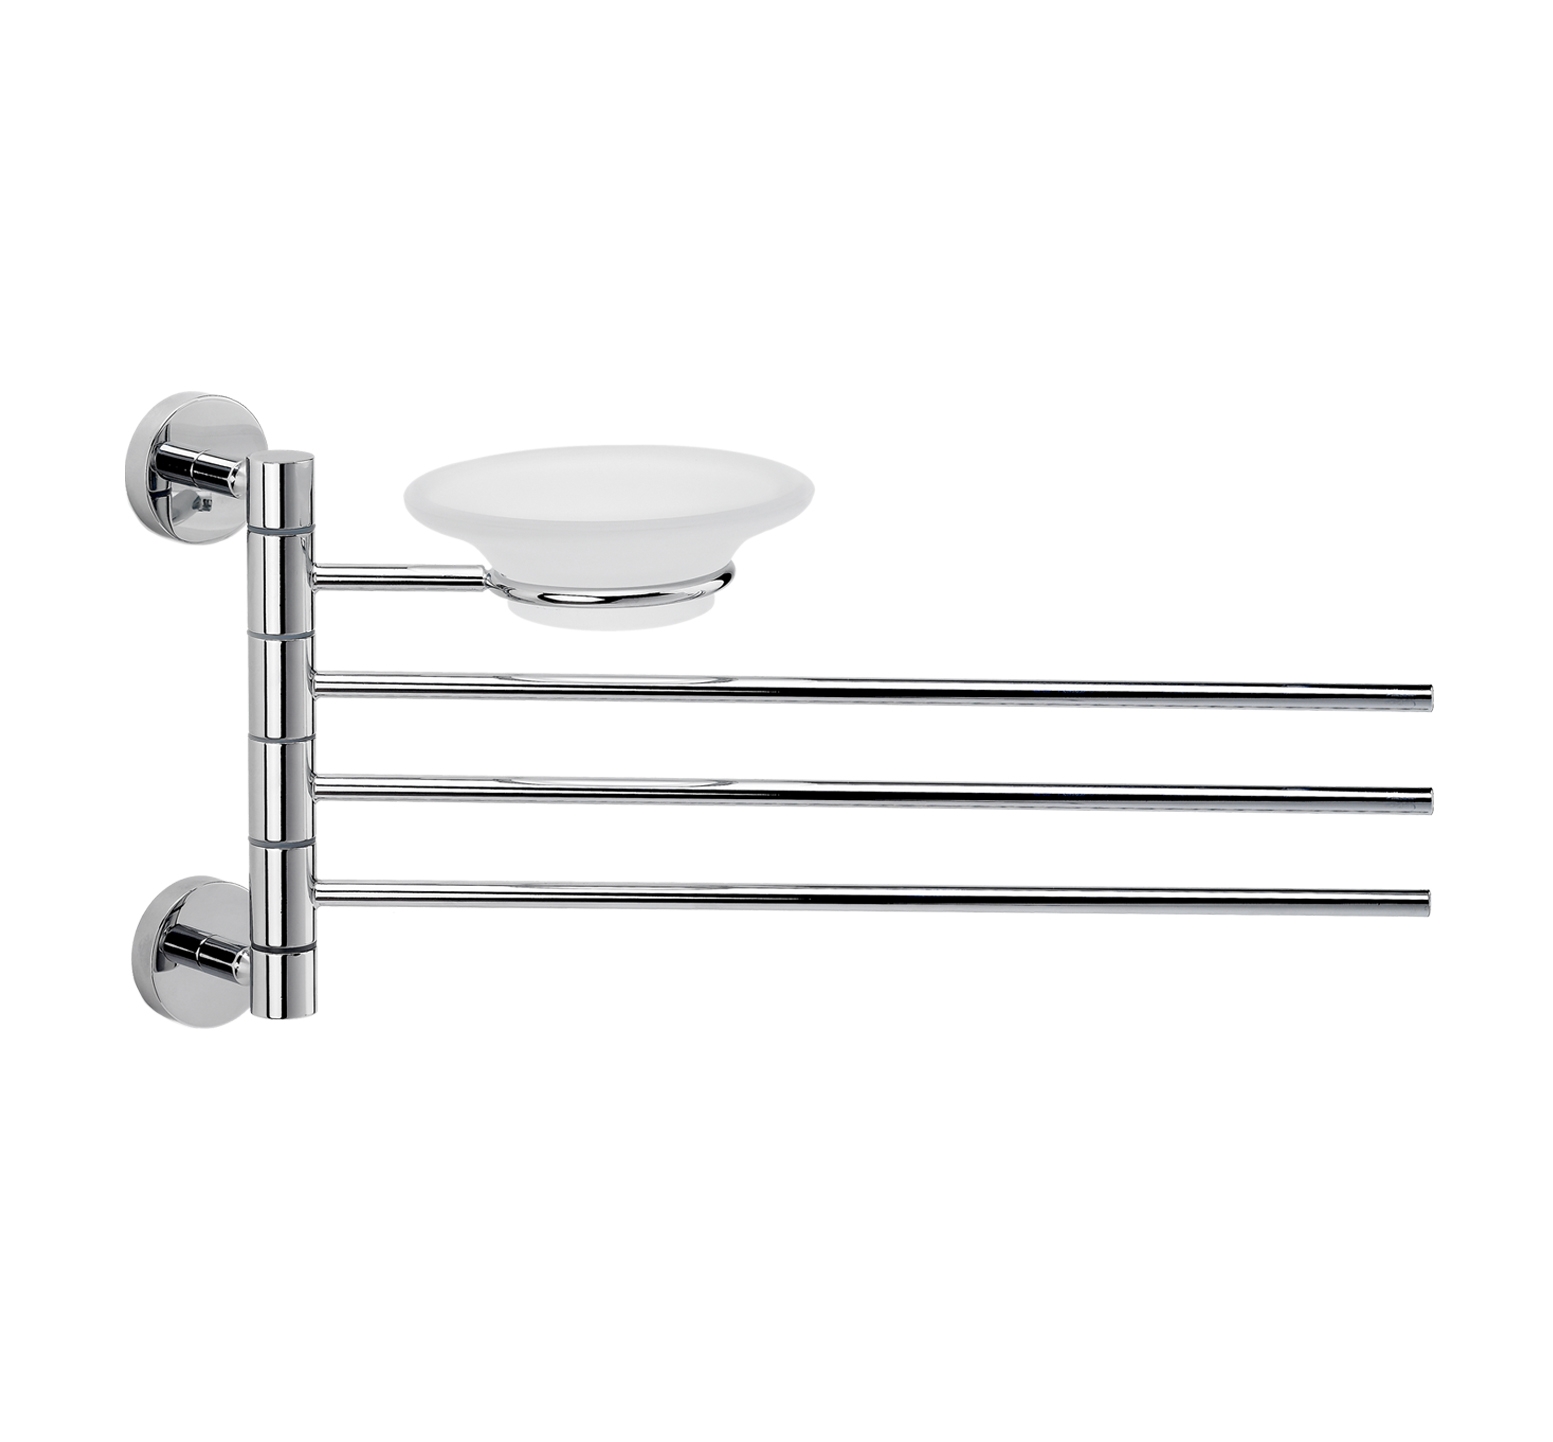 Wall towel rack with three rods and soap carrier - MINIMAL LINE